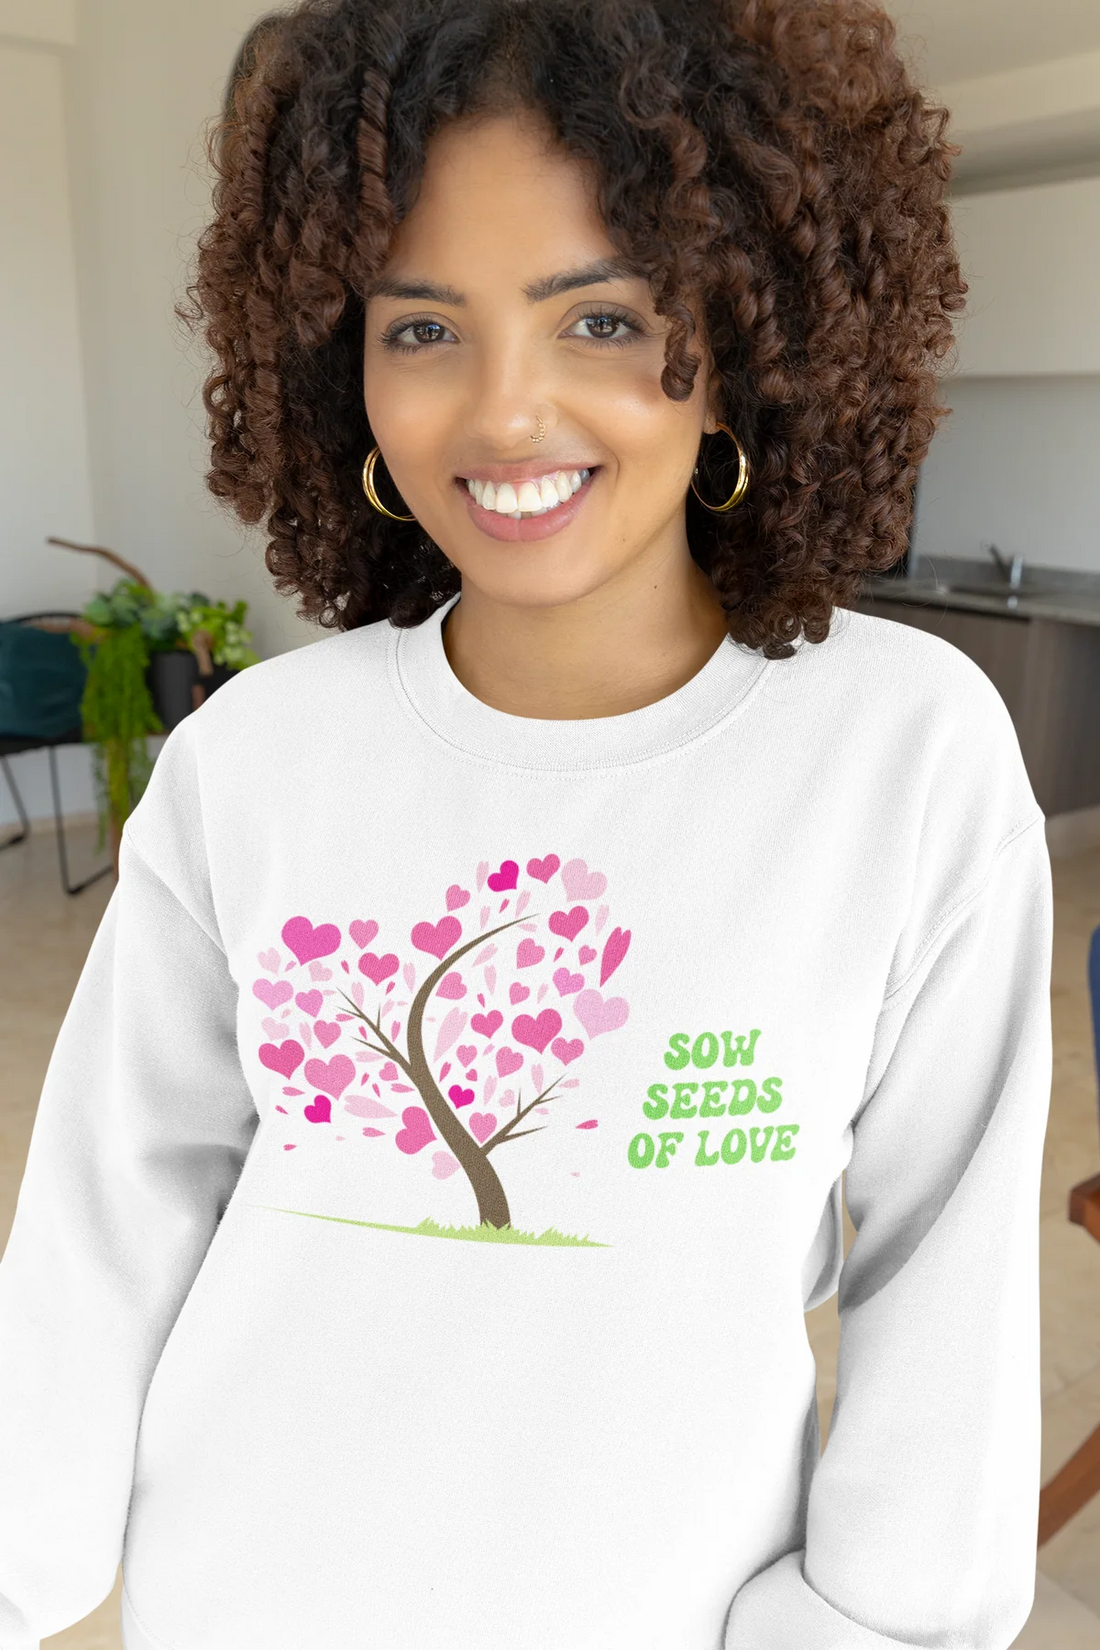 Sowing Seeds of Love: 10 Clothing & Accessory Ideas